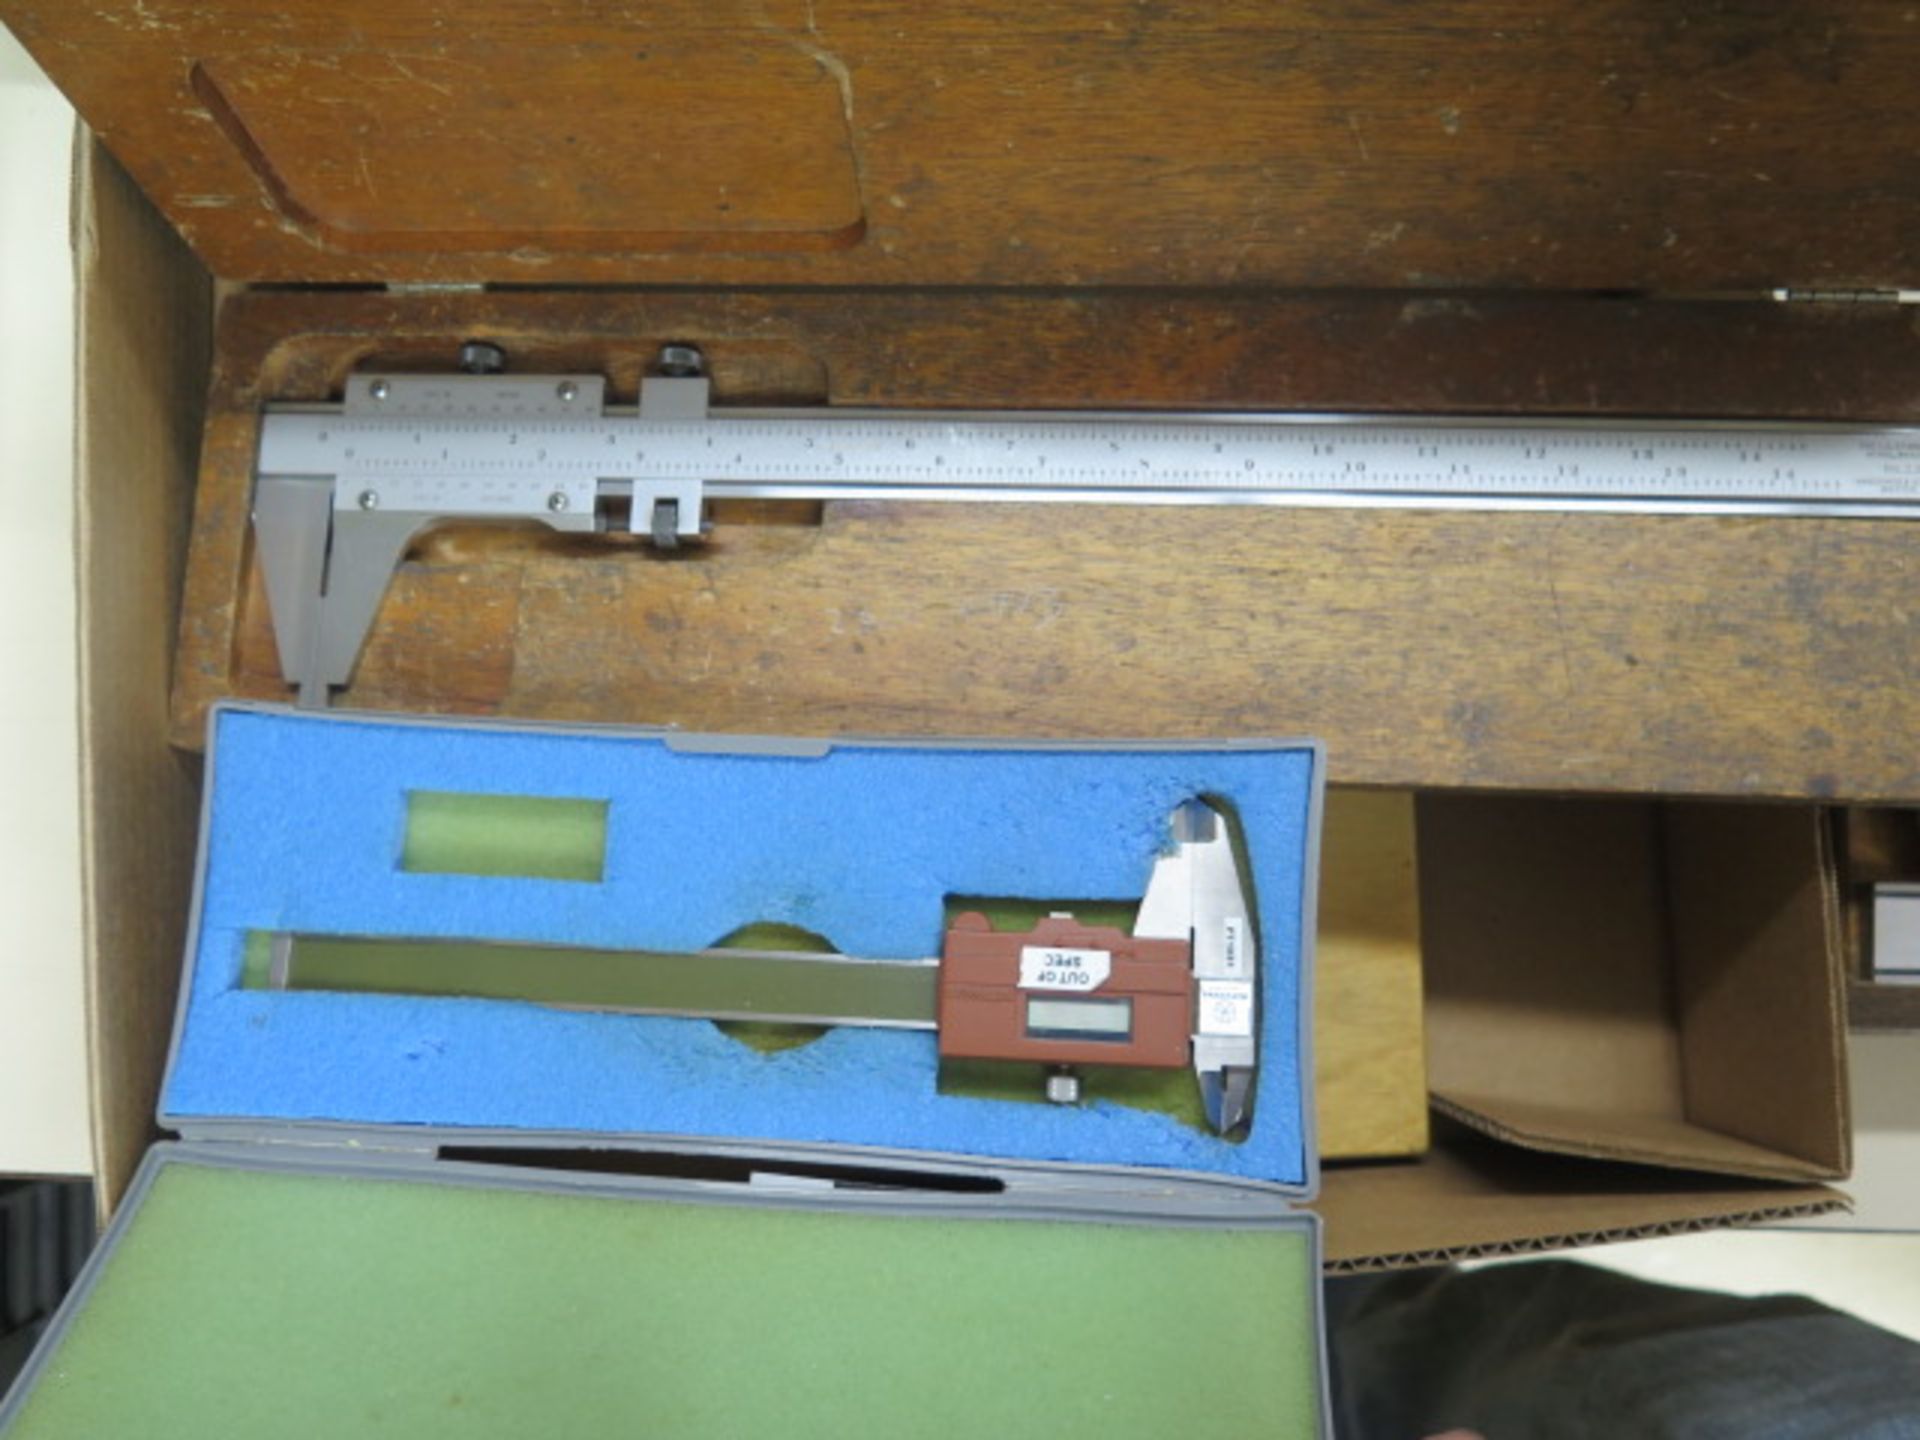 Misac Digital, Dial and Vernier Calipers (SOLD AS-IS - NO WARRANTY) - Image 2 of 3